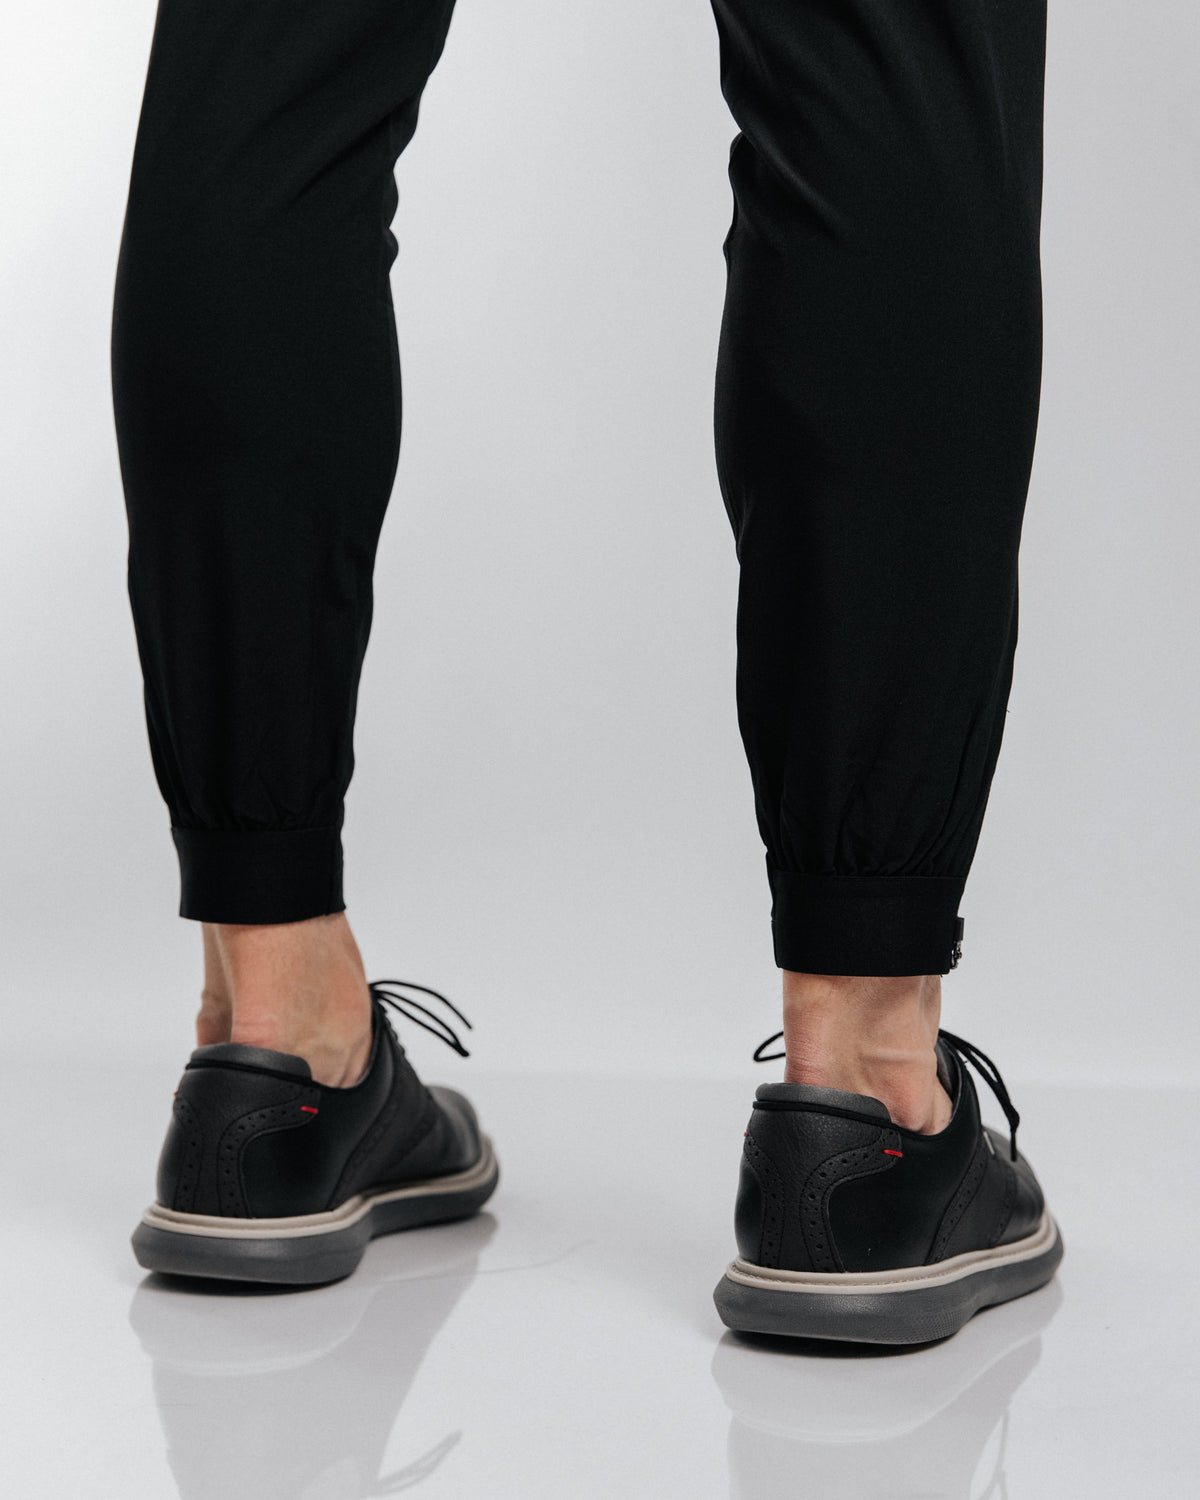 The Ultimate Guide to Choosing the Correct Golf Joggers Length